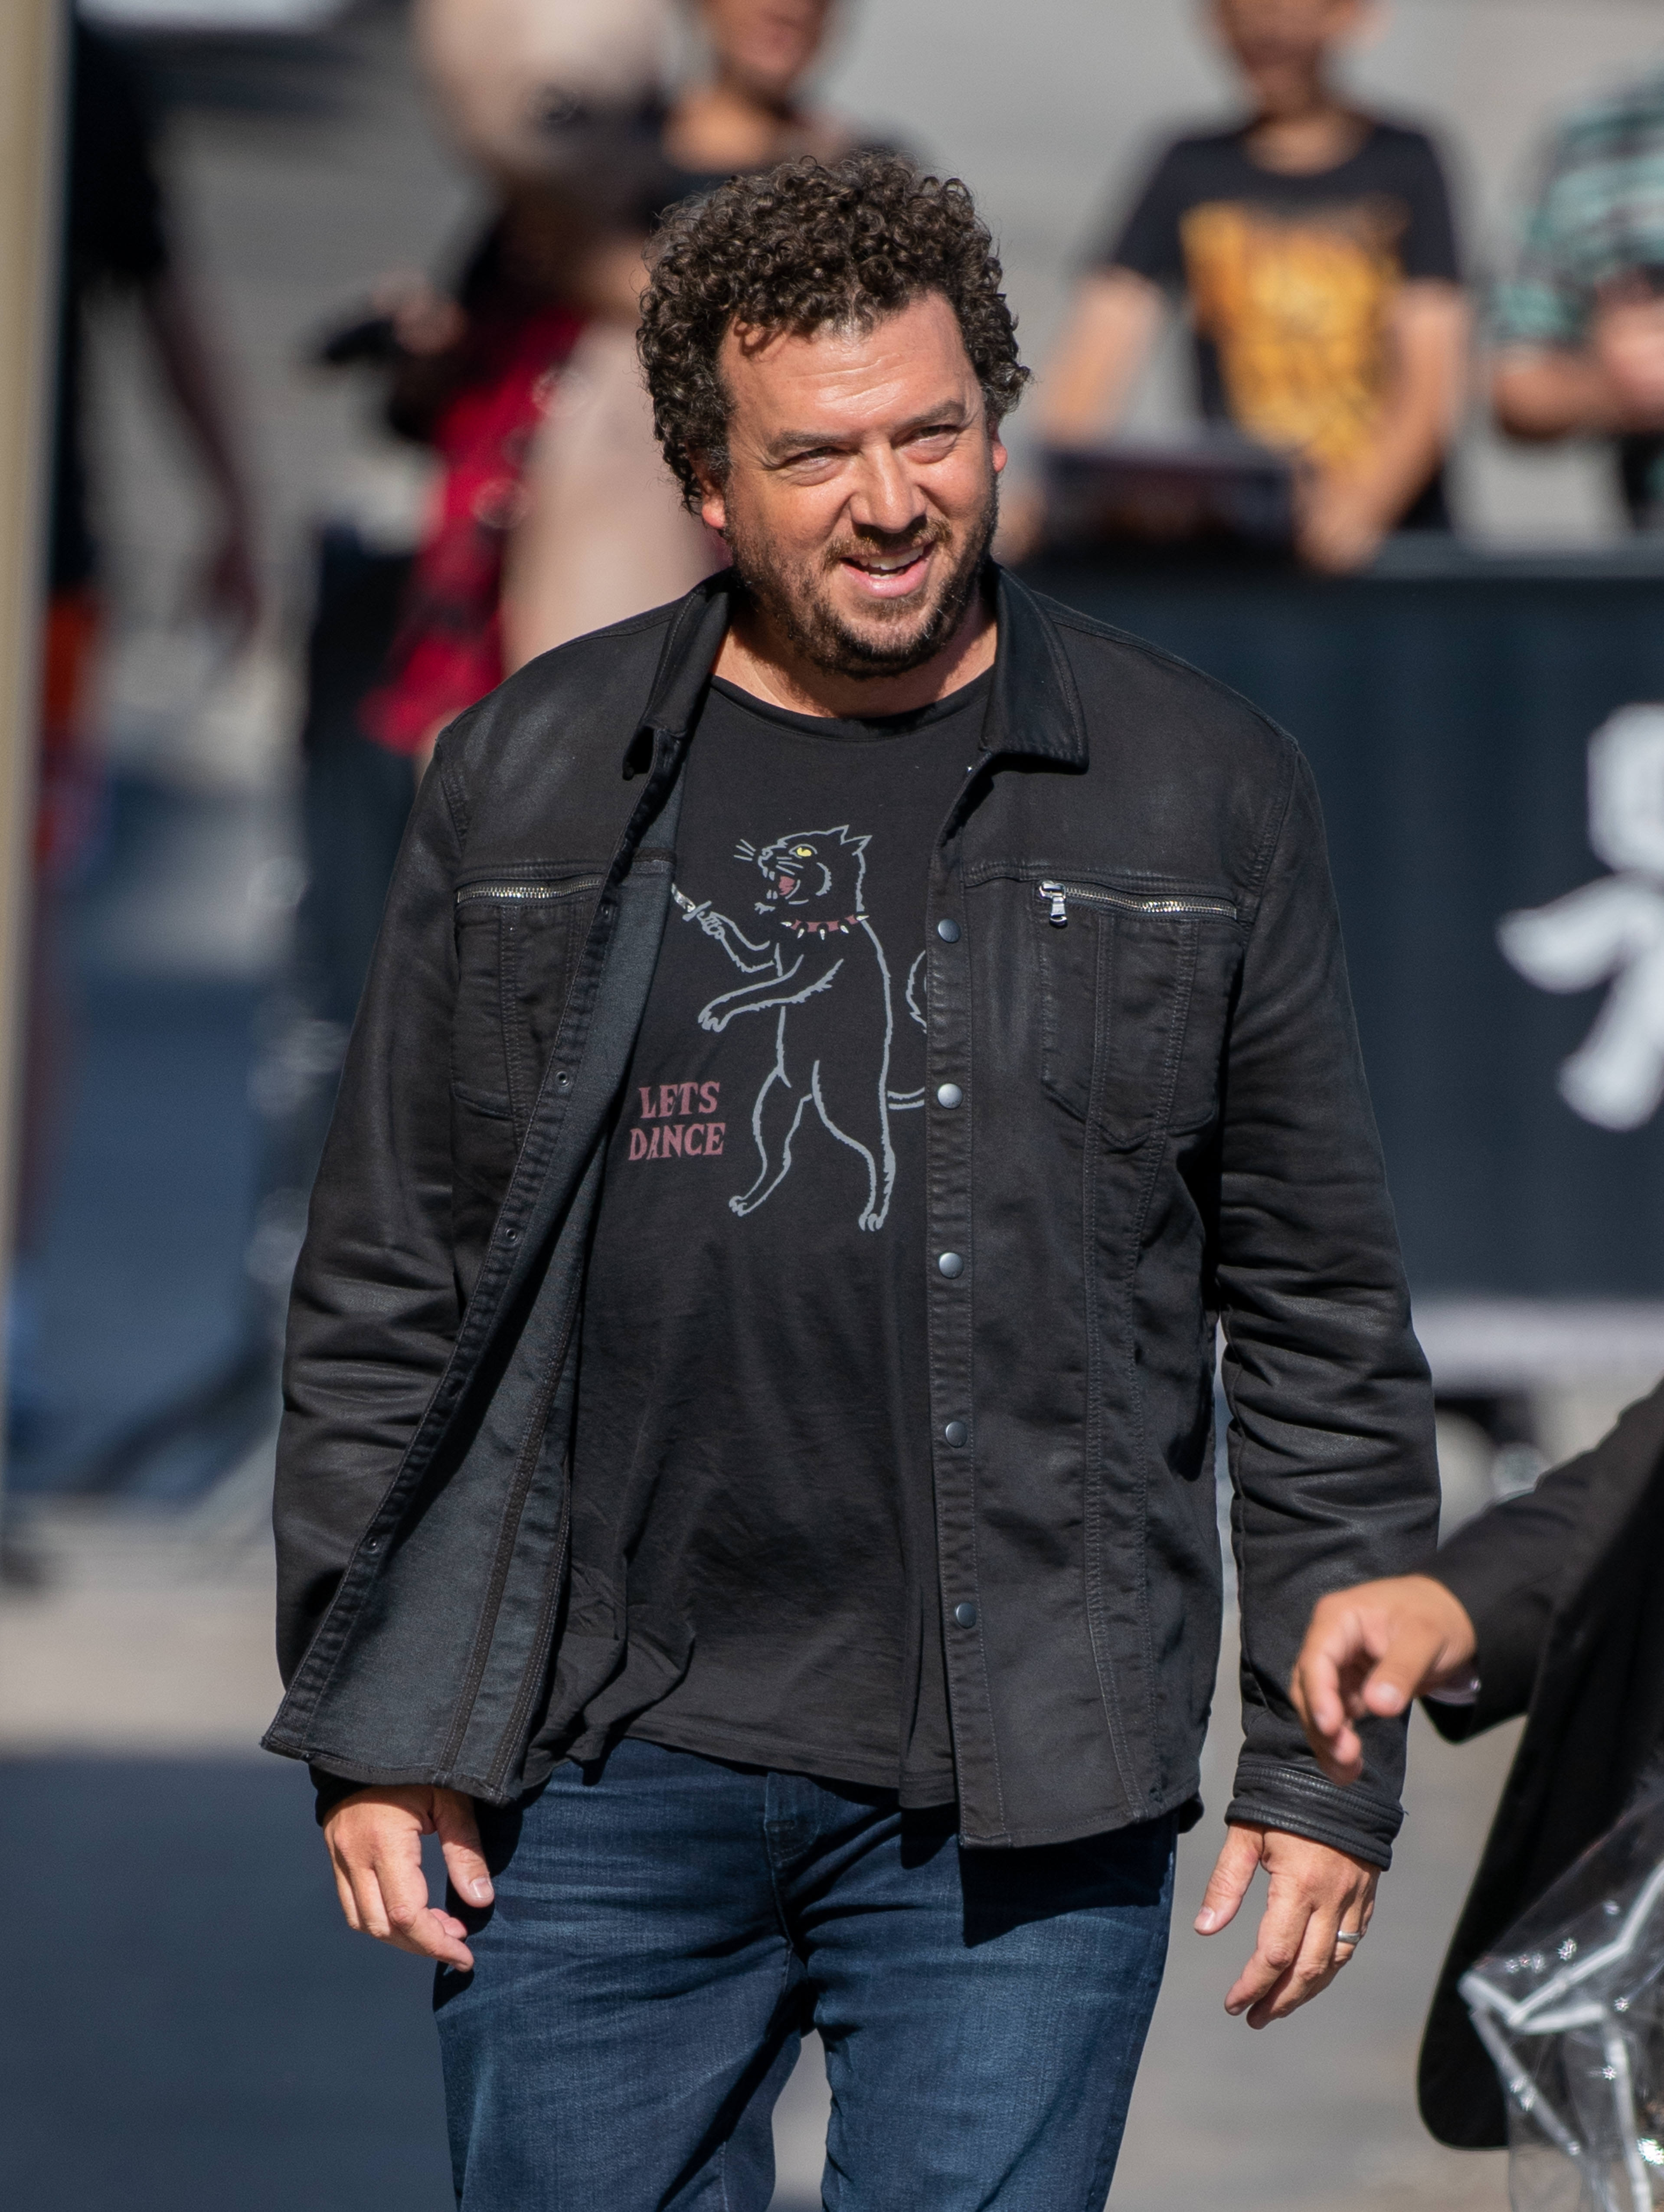  Danny McBride is seen at 'Jimmy Kimmel Live' on July 24, 2019 in Los Angeles, California. | Source: Getty Images